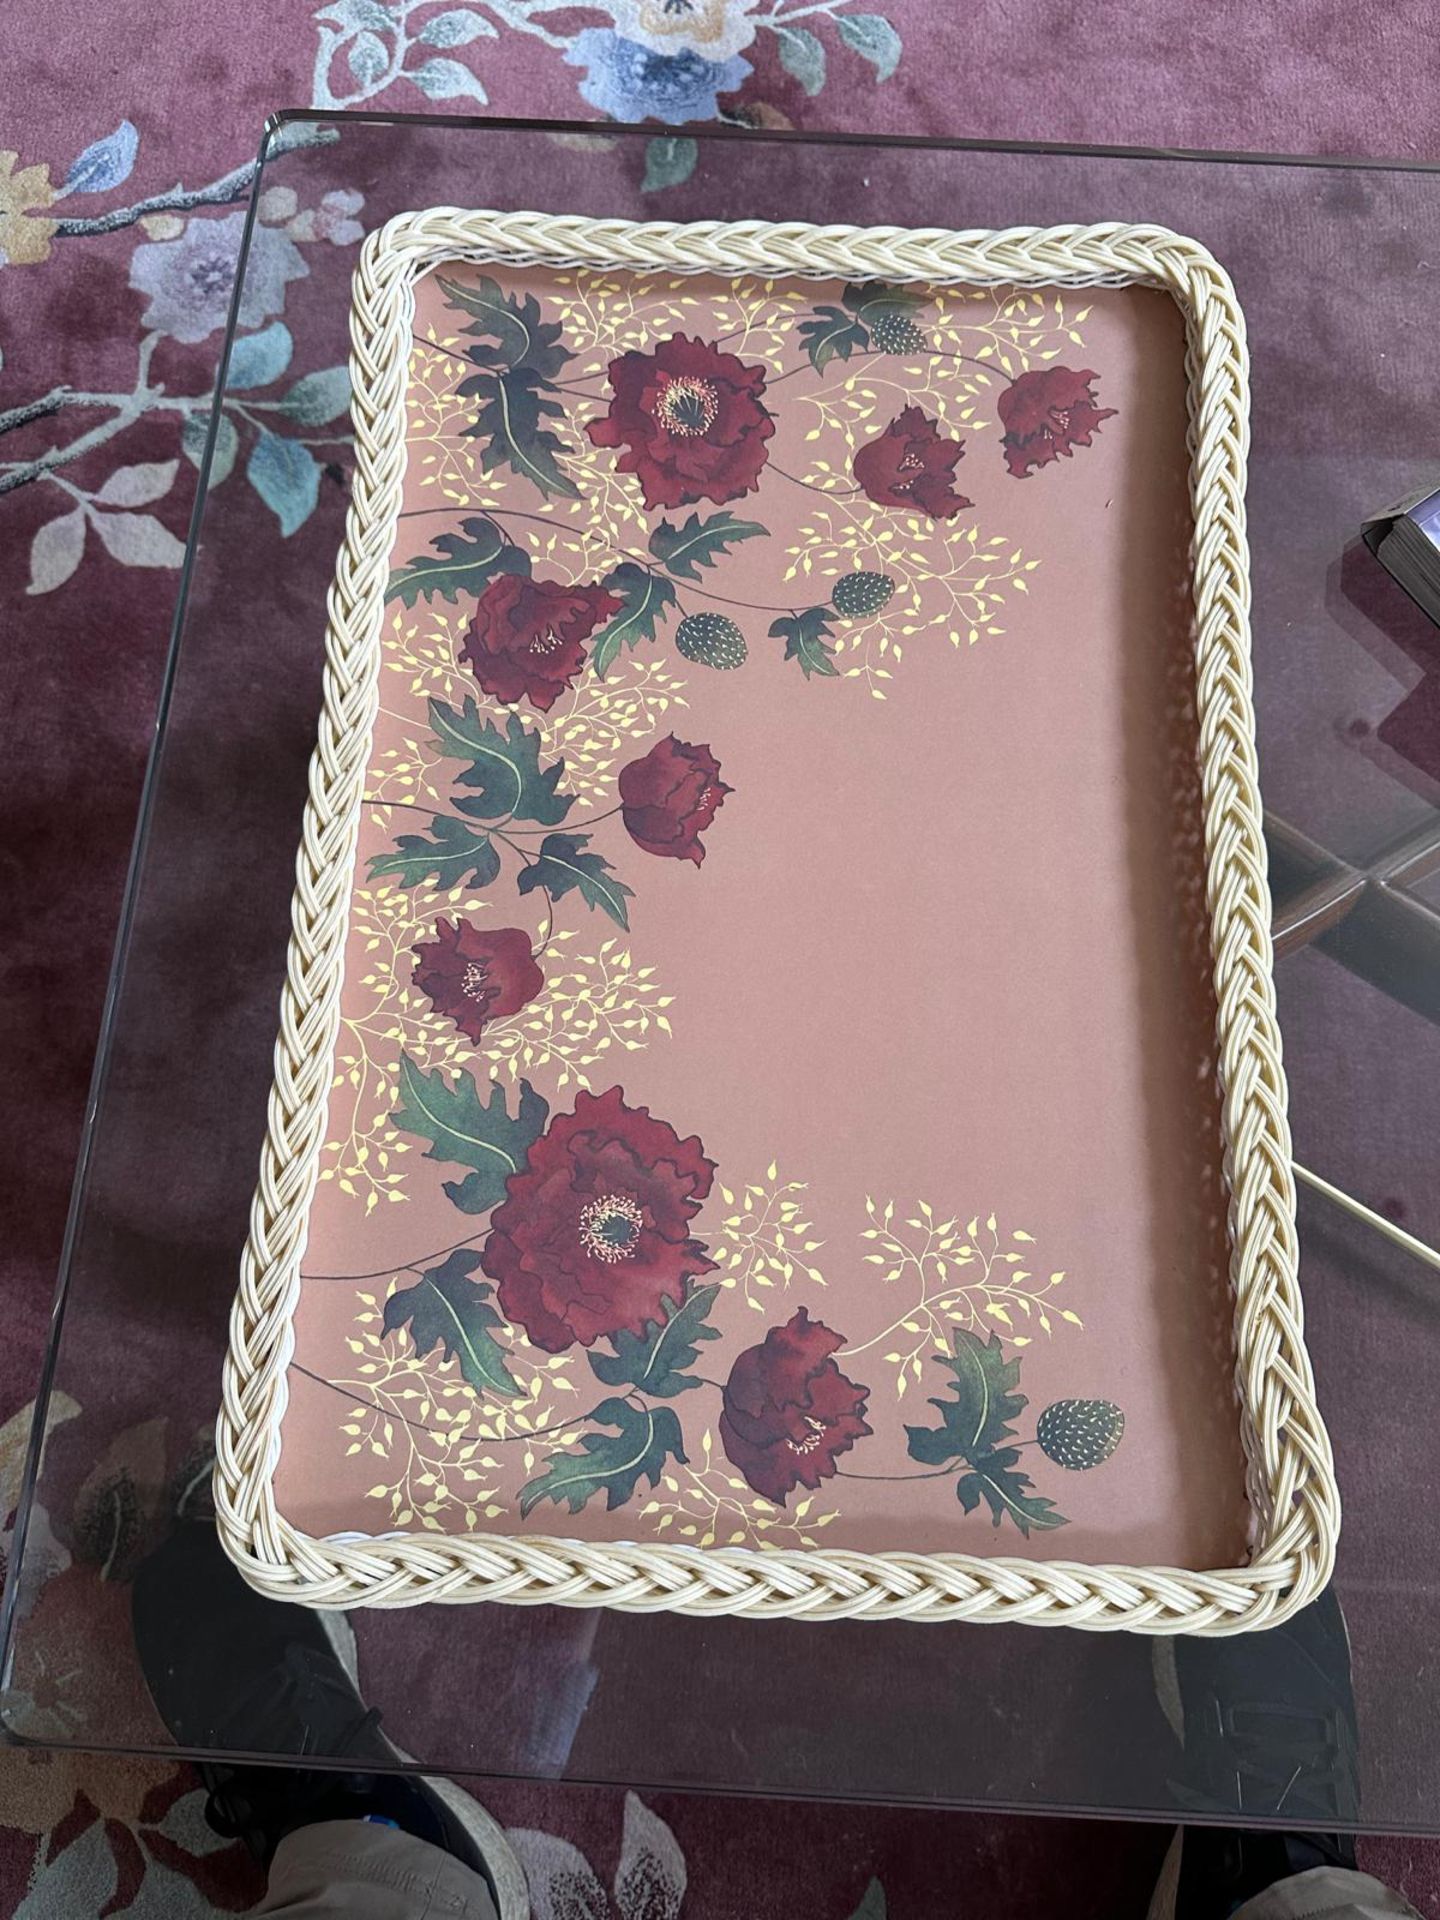 Kitsch Floral Plastic Tray, Woven Large Melamine 1970s  56 x 38cm (Apt 1) - Image 2 of 2